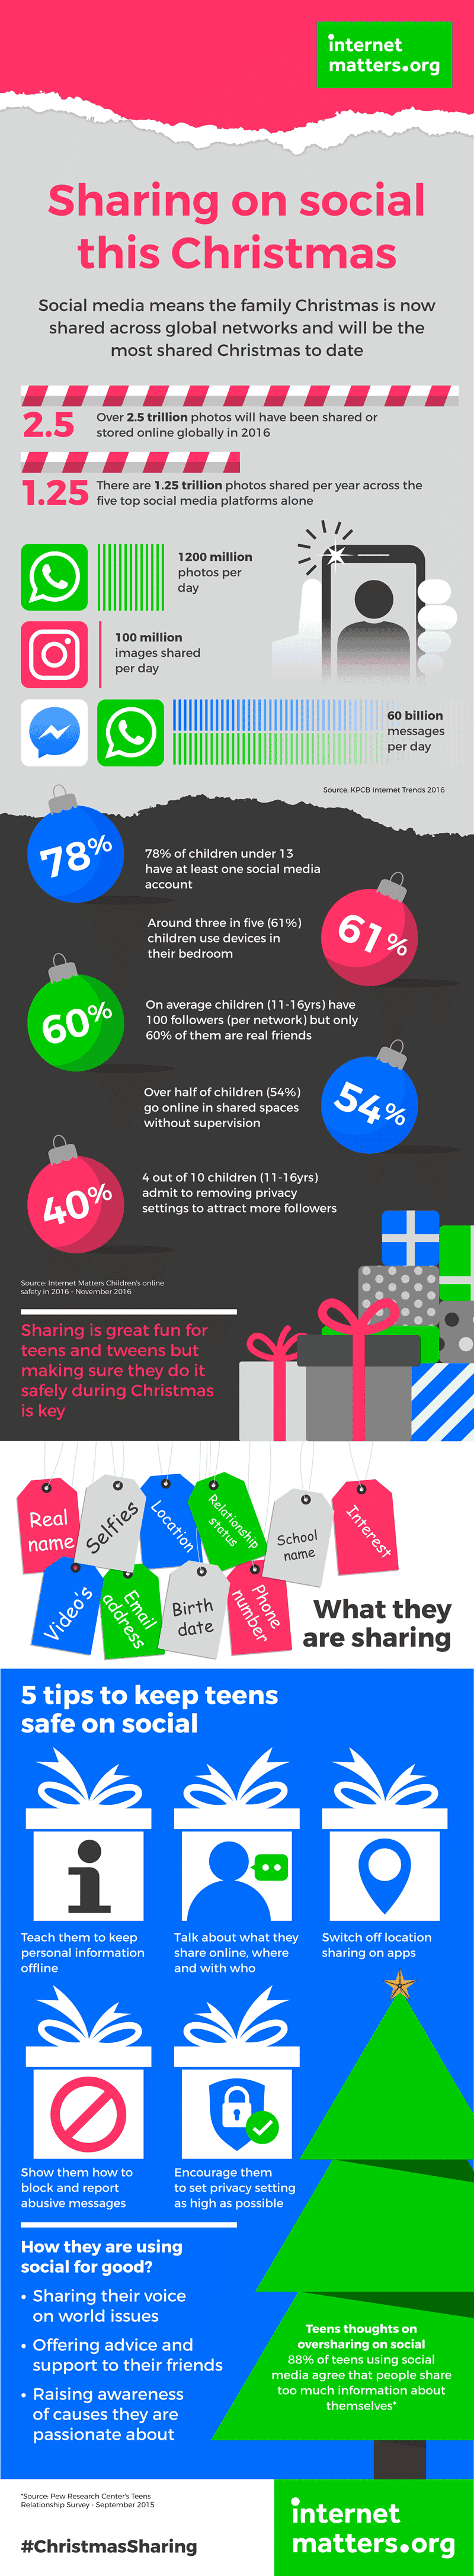 With this Christmas expected to be the most connected ever, 7 billion images are set to be shared on December 25th on social media. See other stats on social sharing and tips on helping kids share safely online. 